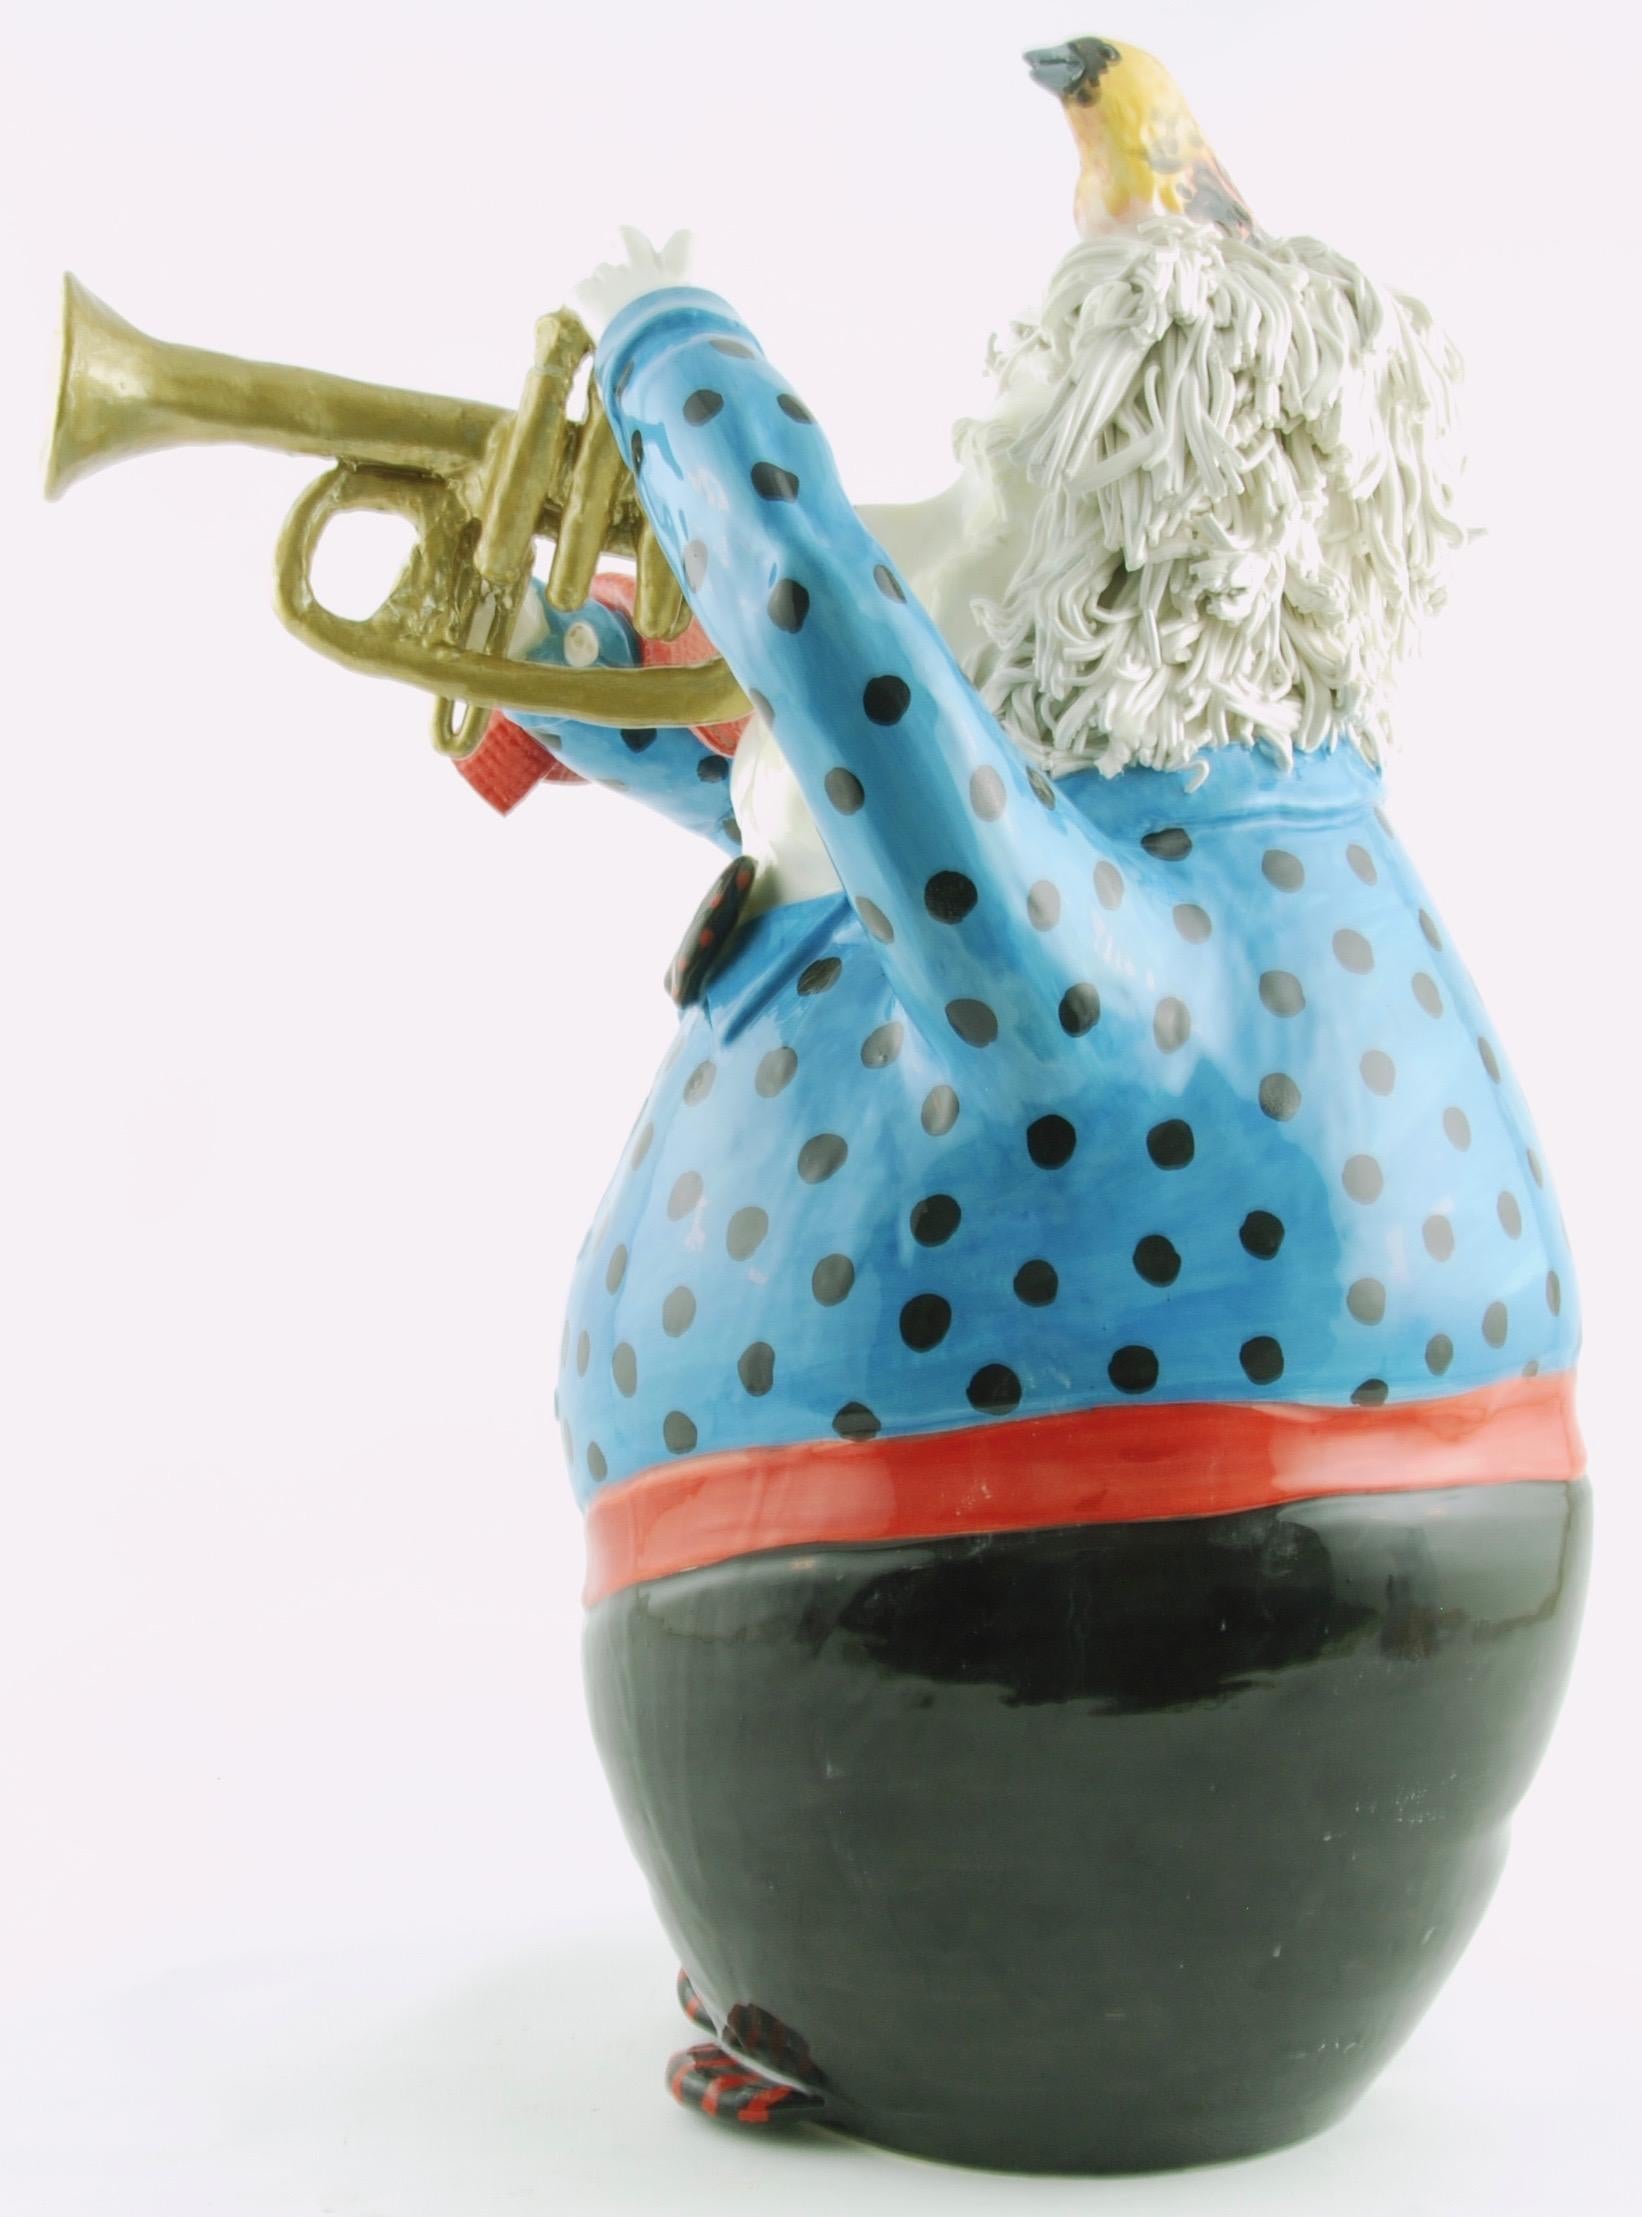 Modern Musician Trumpet Decorative Ceramic Piece, Handmade Italy, 2021, Hand-Crafted For Sale